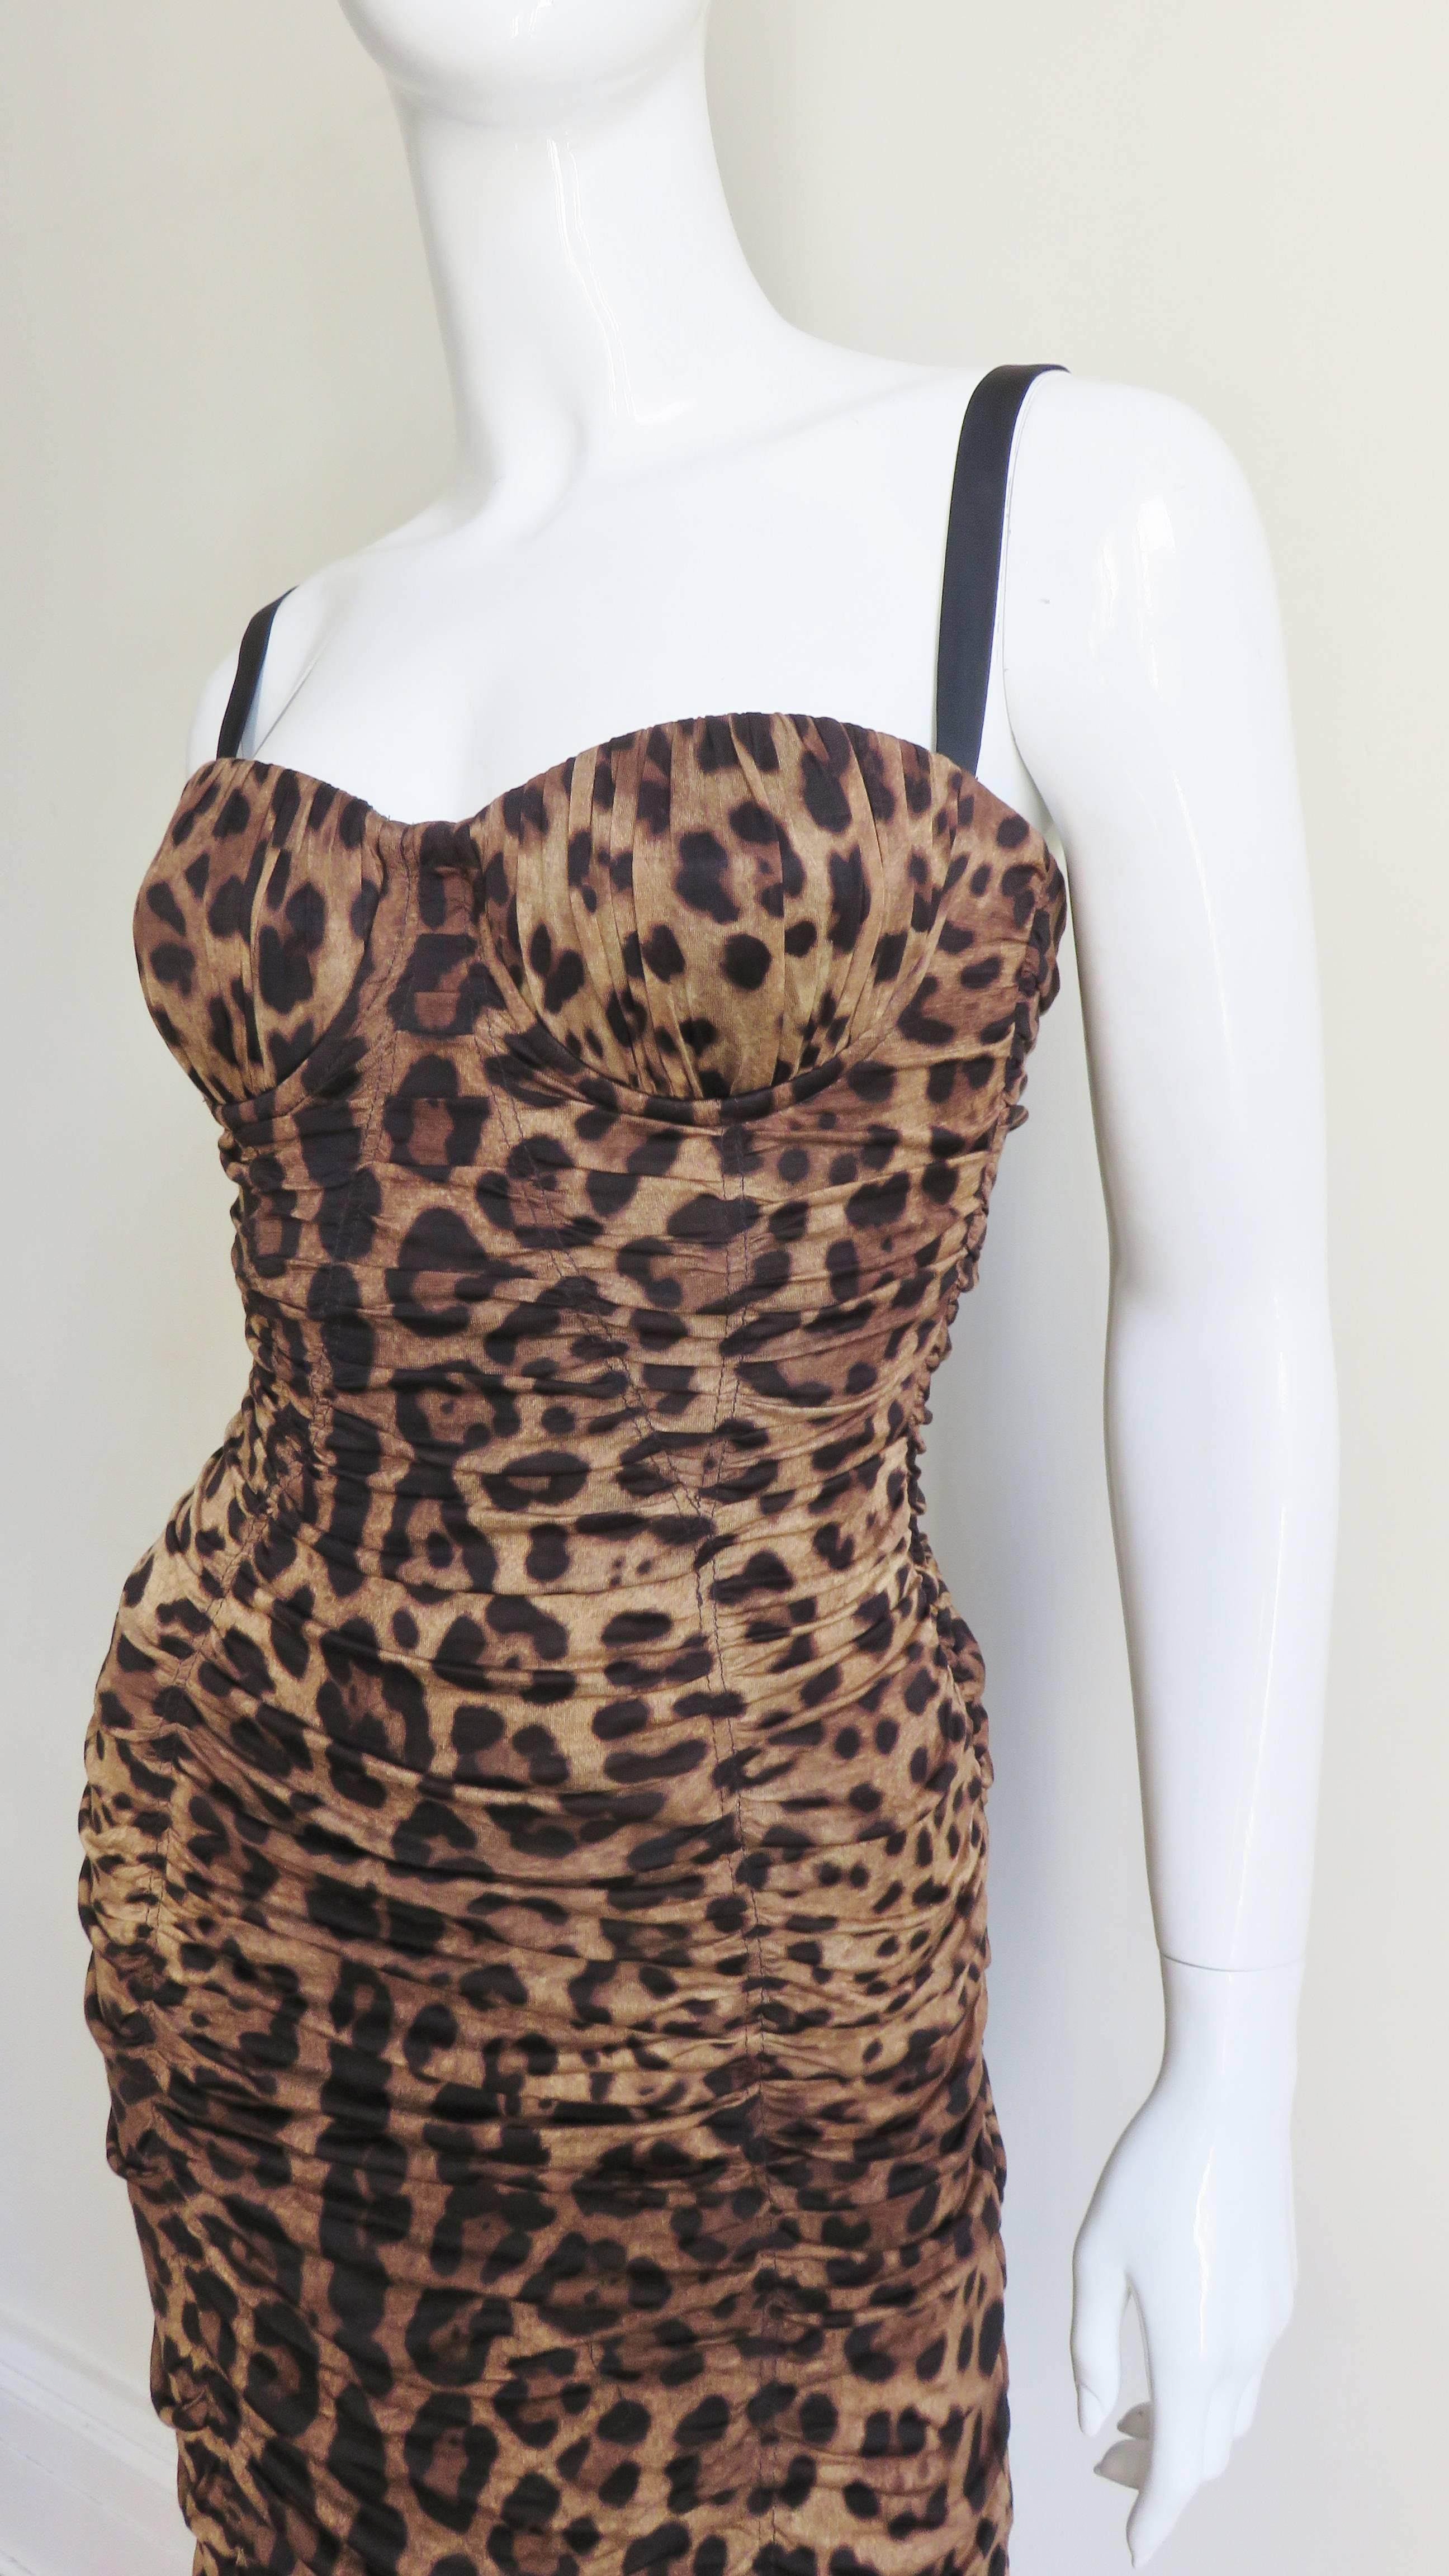 A fabulous fine silk with stretch leopard print wiggle dress from Dolce & Gabbana.  It has underwire bust cups, bodice boning and black silk straps.  The dress is fitted with 7 vertical panels horizontally ruched around the dress.  The bodice is